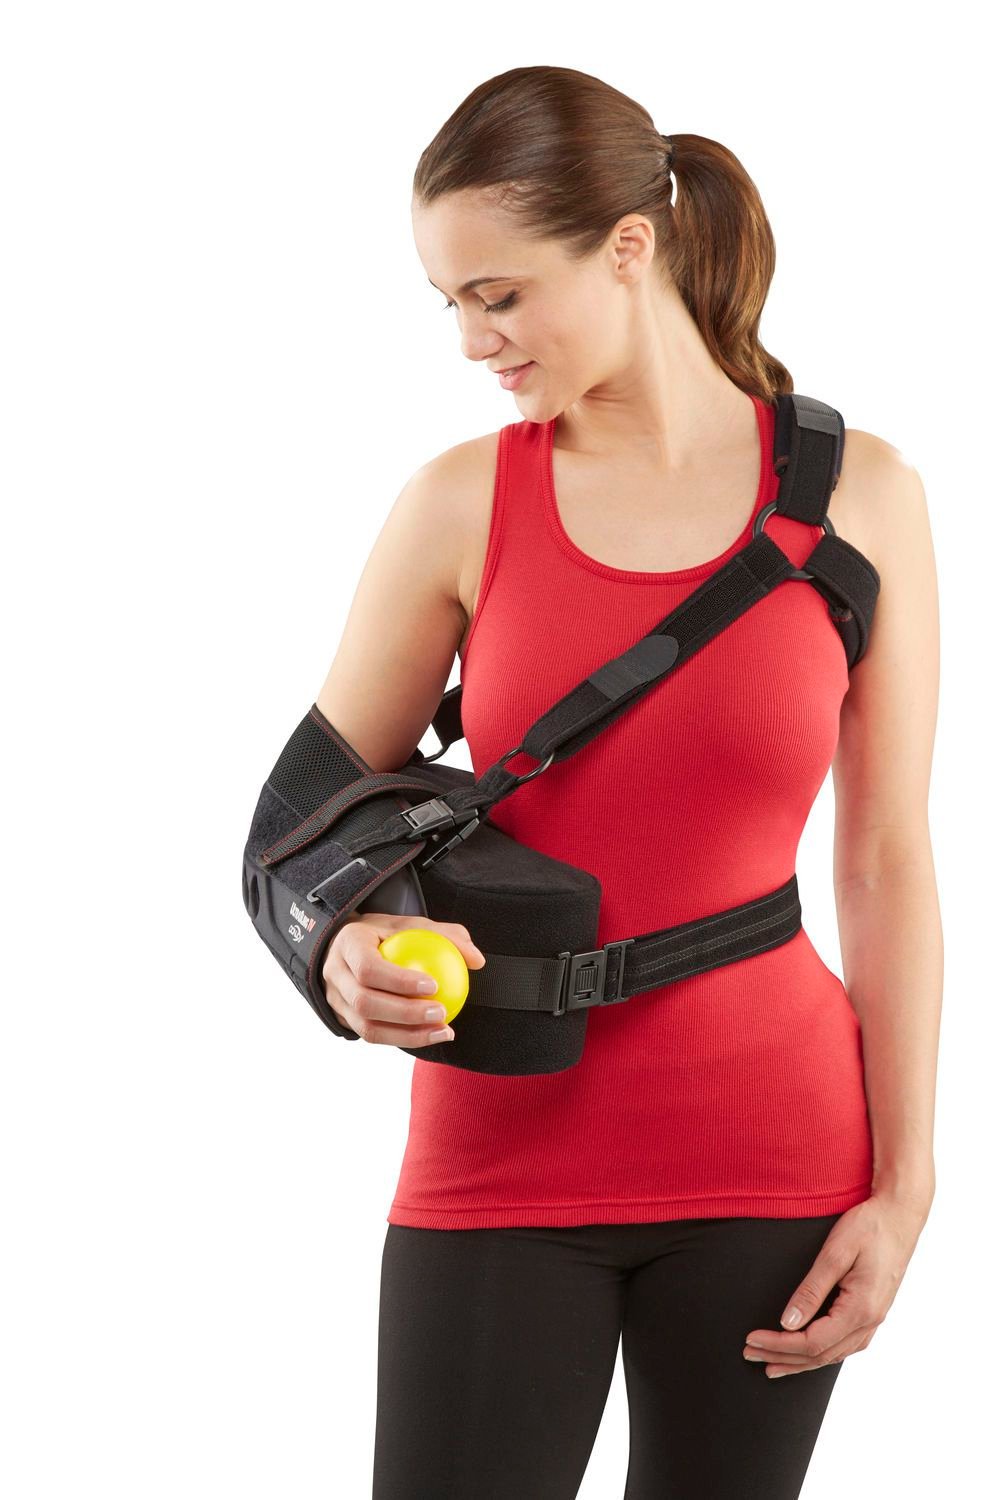 Arm sling with shoulder abduction pillow / human UltraSling® IV DonJoy